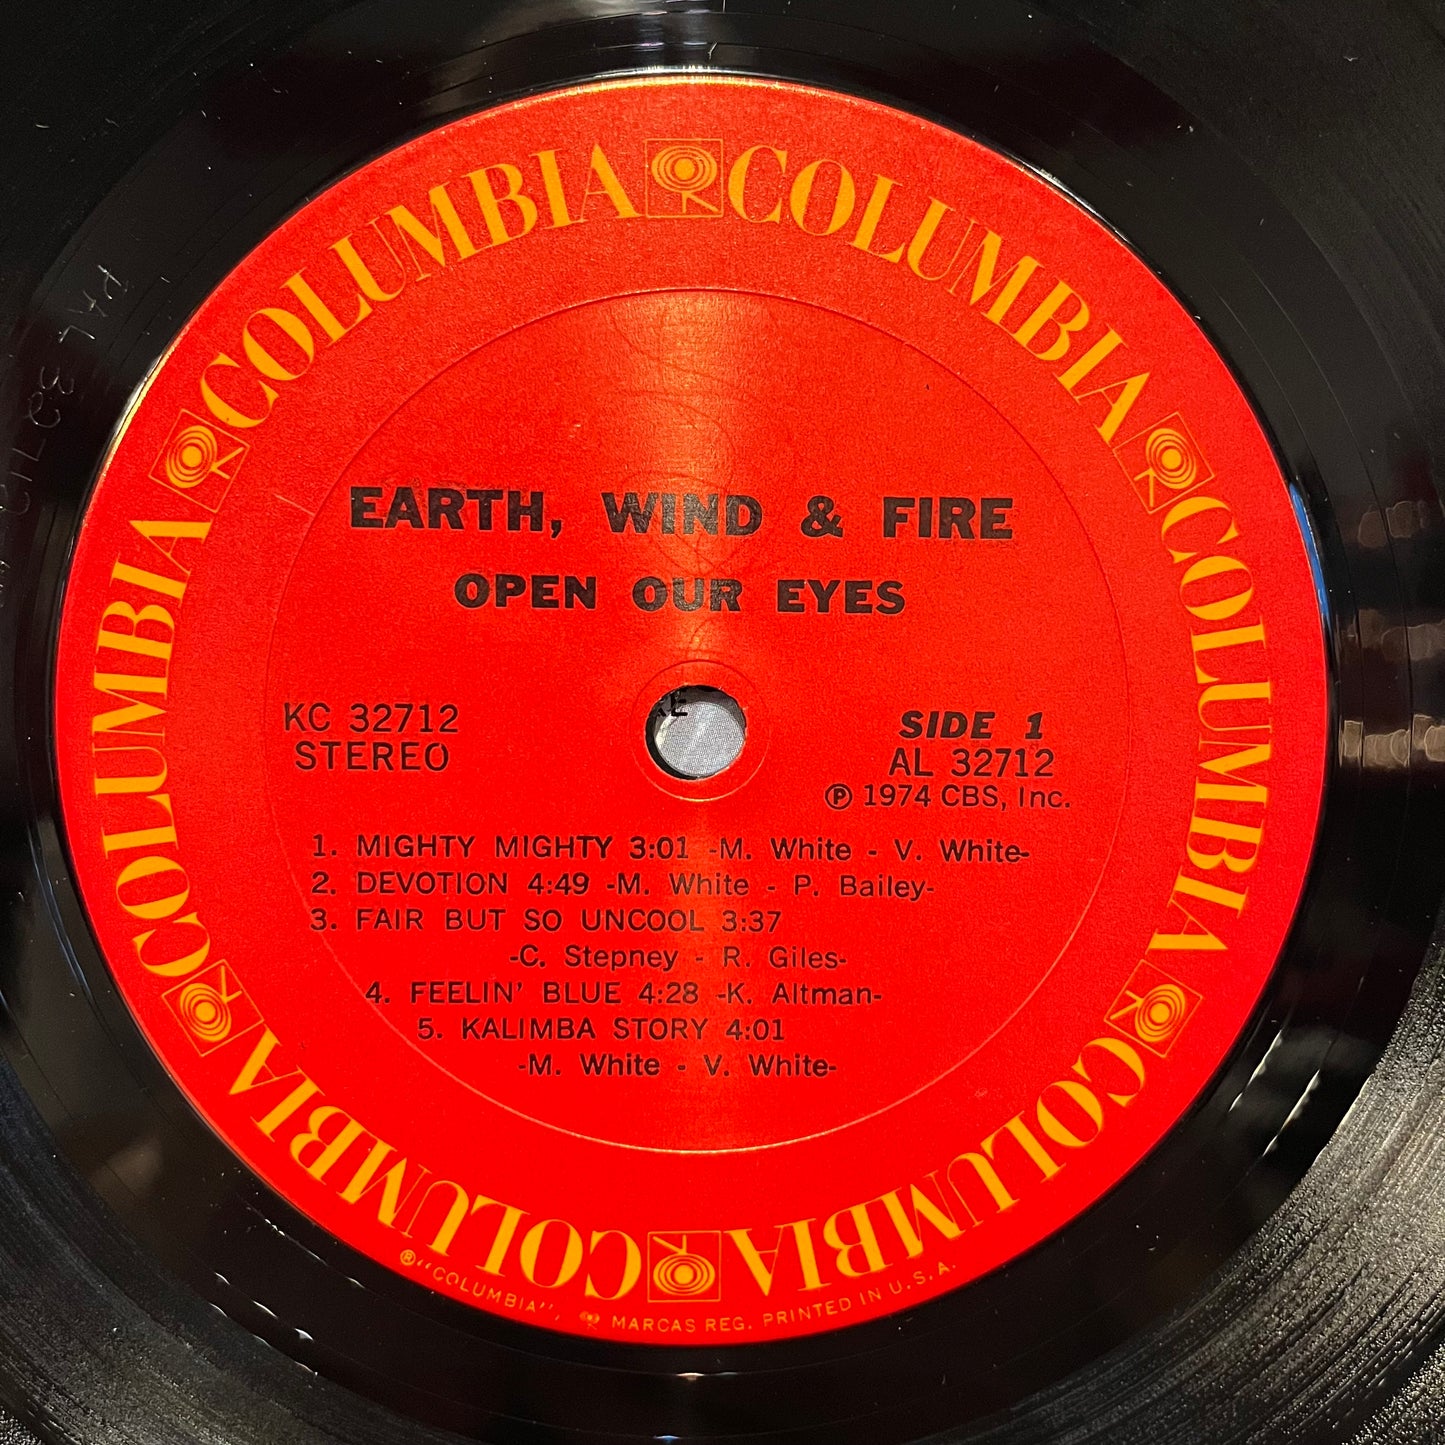 Earth, Wind & Fire Open Our Eyes LP Excellent (EX) Near Mint (NM or M-)